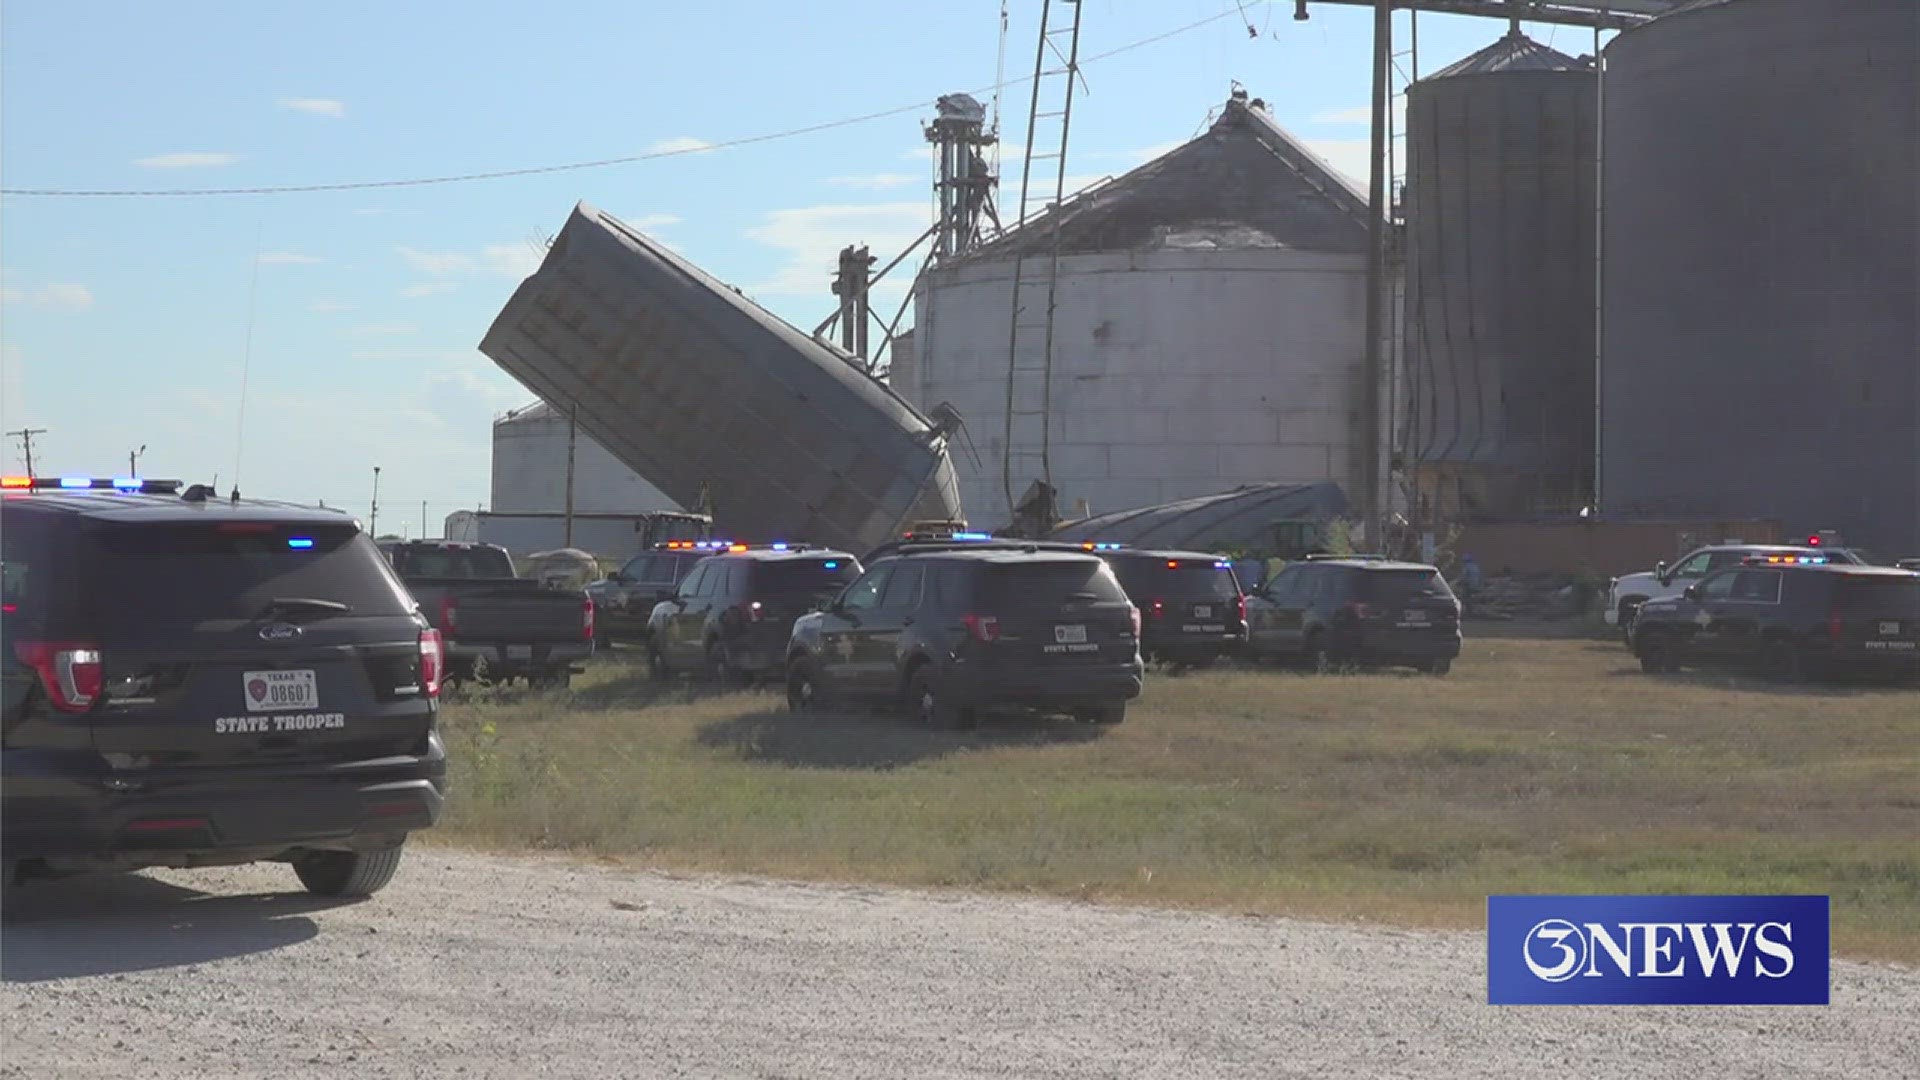 Sergio 'Jason' Alvarez died when two grain elevators ruptured and reportedly collapsed onto two 18-wheelers.